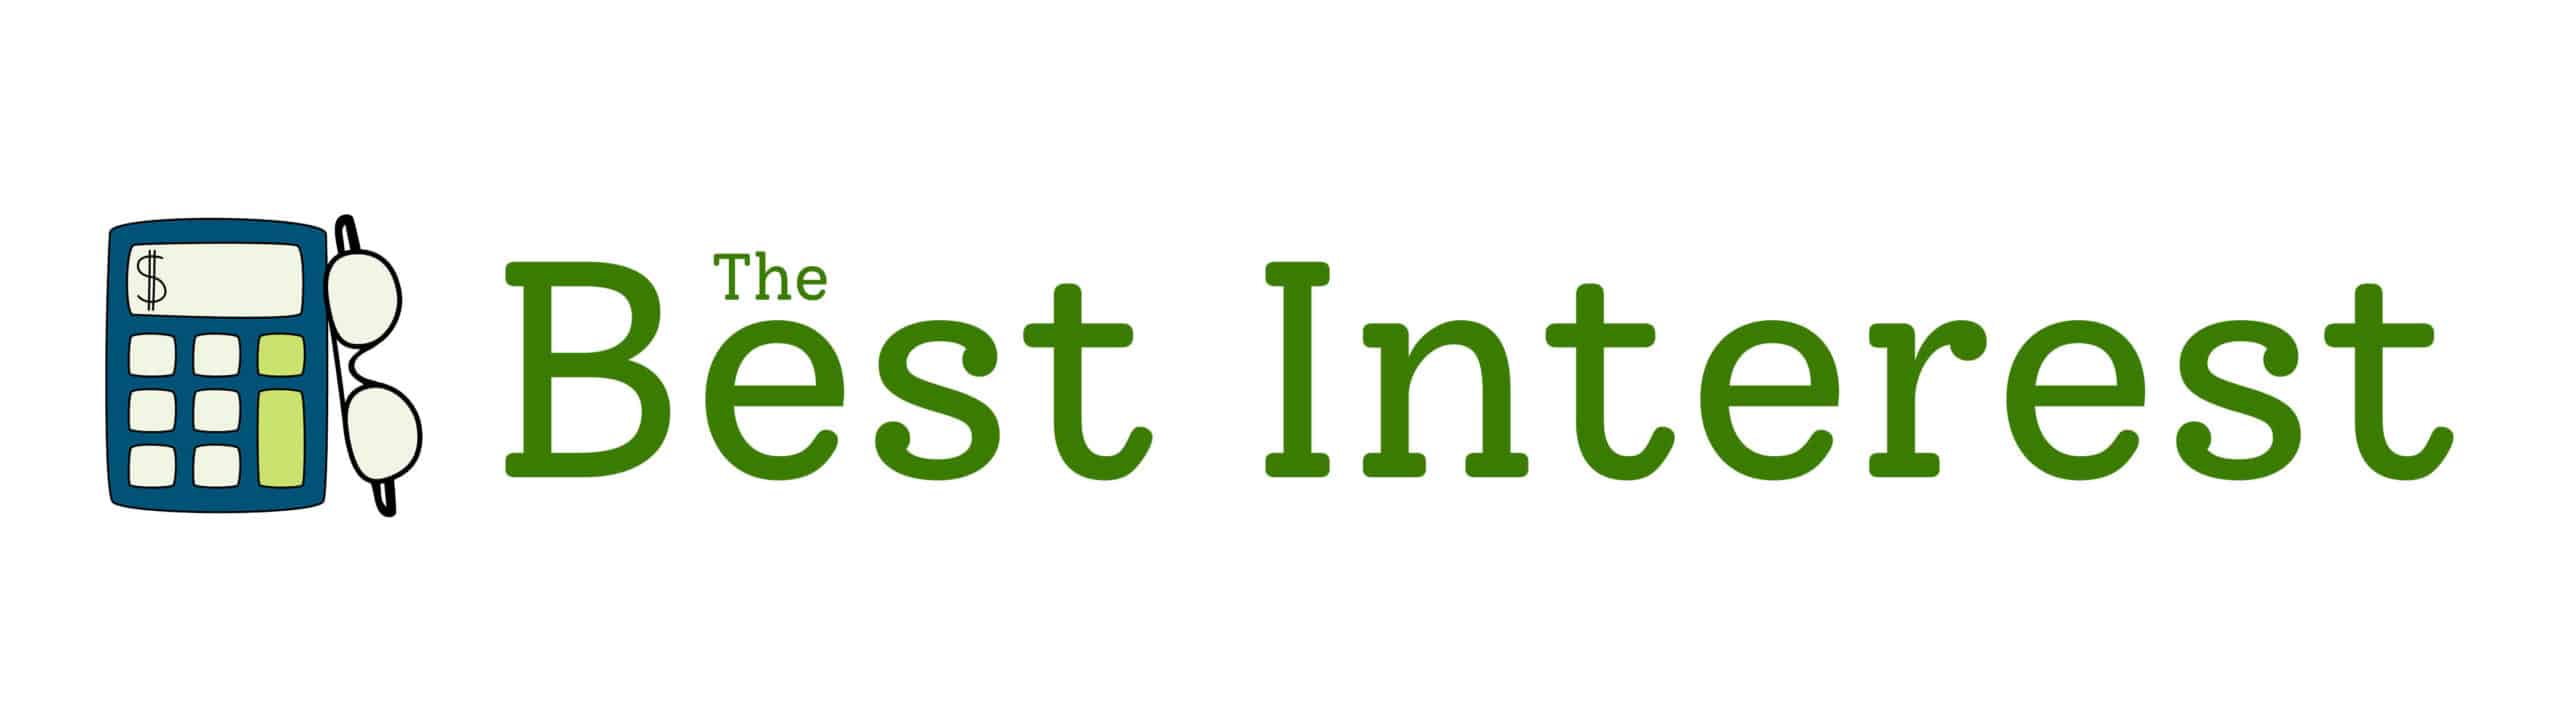 Logo of 'the best interest' featuring a calculator and coin, symbolizing financial planning and investment.